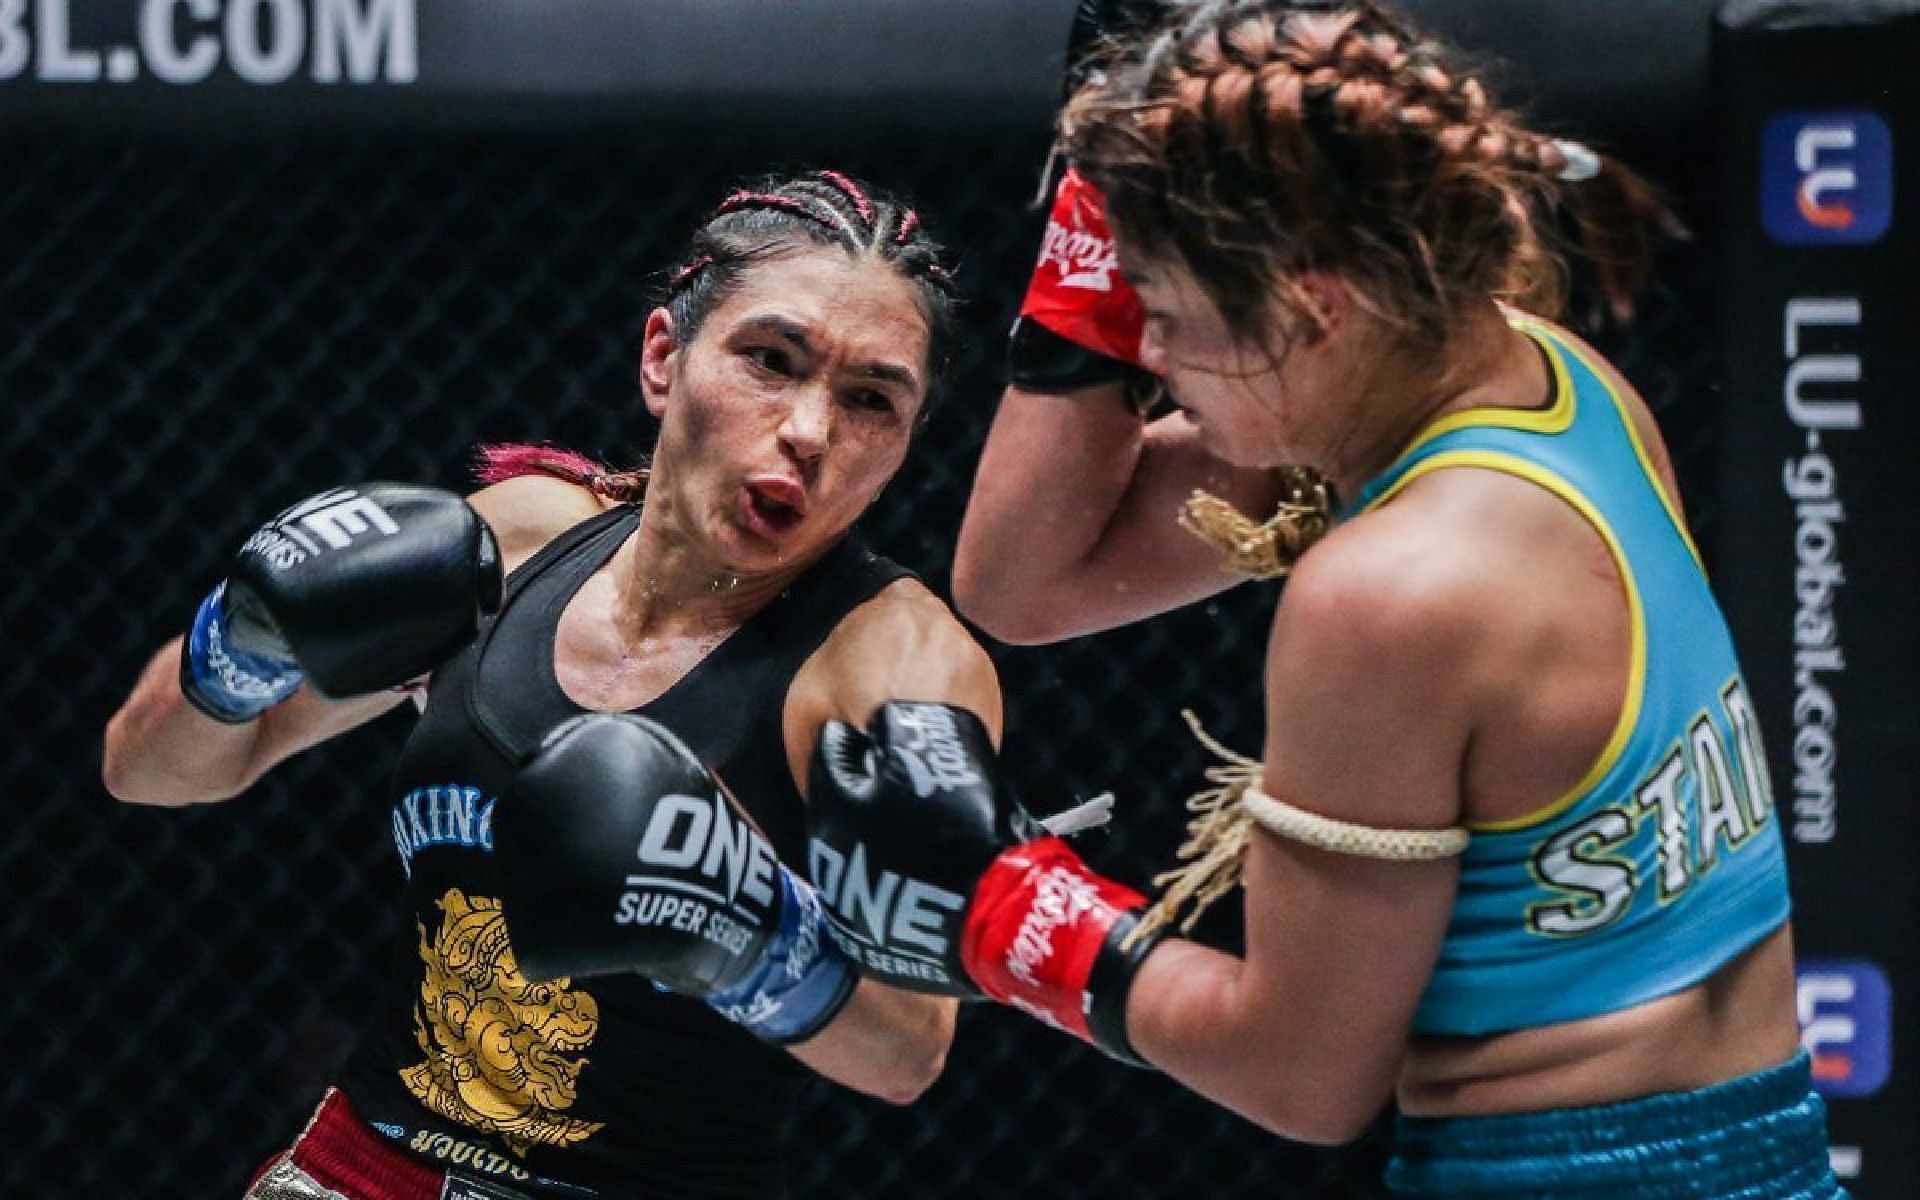 Janet Todd (left) and Stamp Fairtext (right) in their second fight in ONE Championship. [Photo ONE Championship]